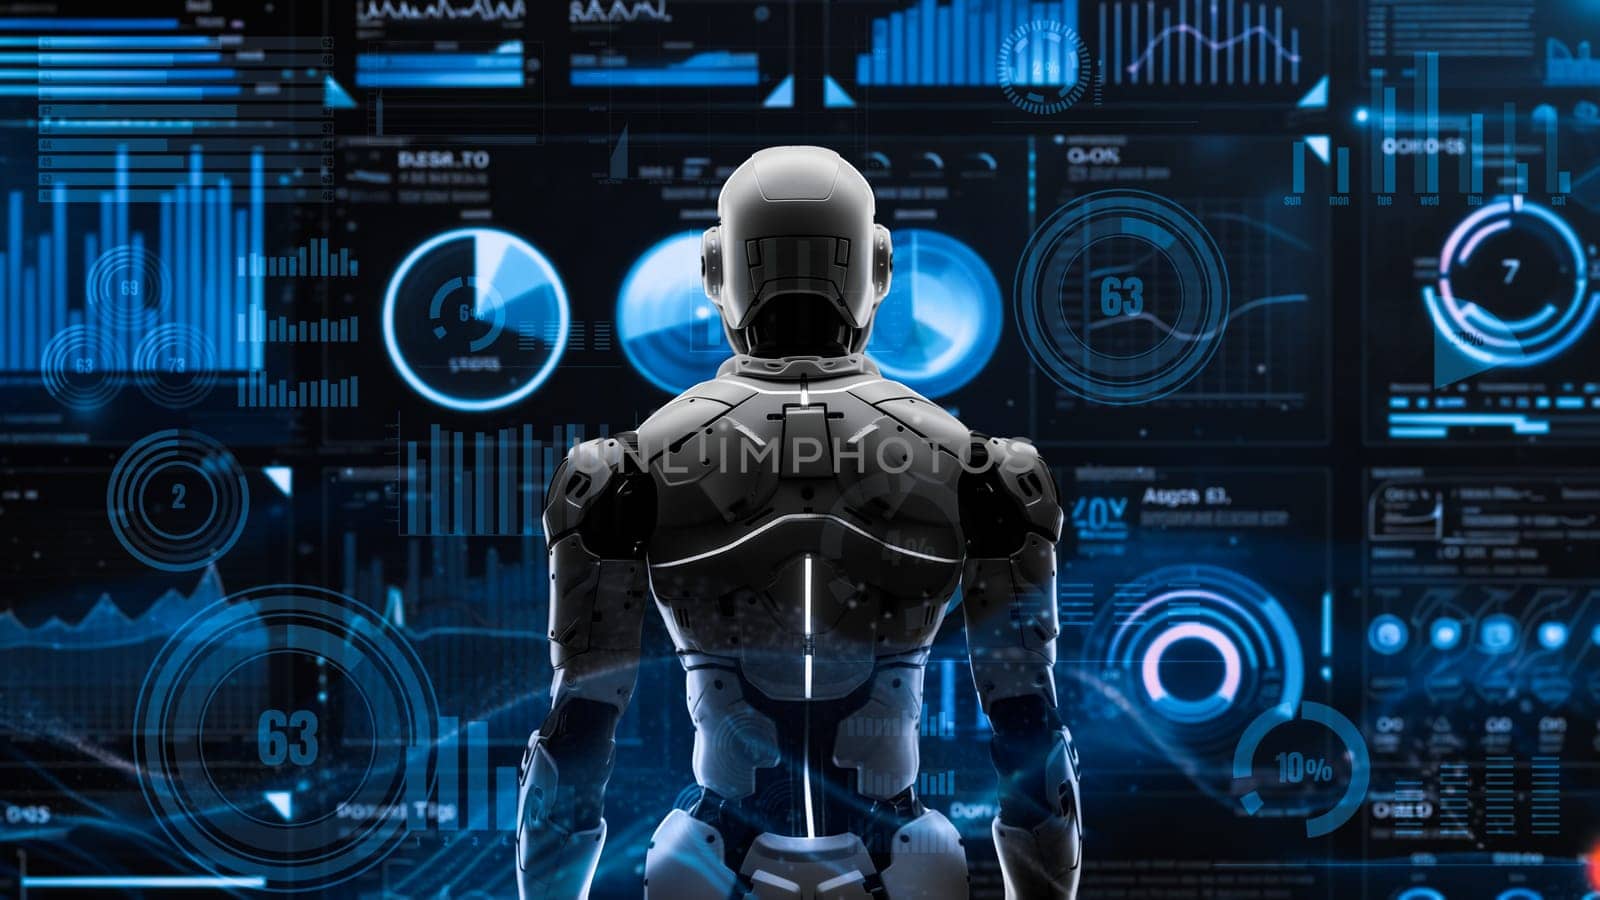 Future robot engineering AI solutions with LISP. A strategic algorithm for marketing robotics automation, LLM tech analysis, and cyber communication. 3D illustration artificial intelligence